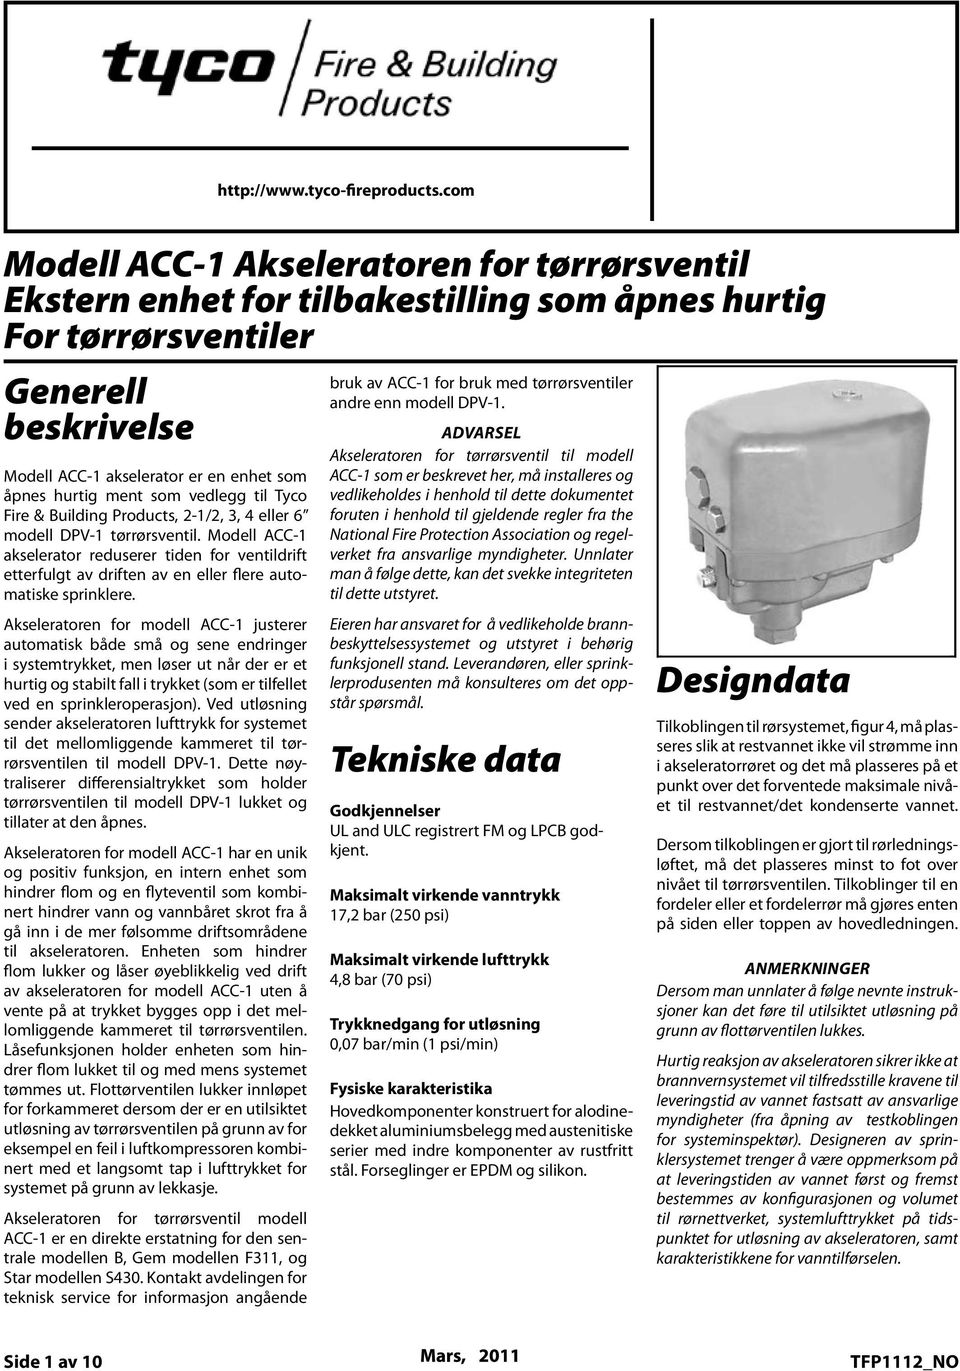 Pipe Valves General Generell Description beskrivelse The Model ACC- Accelerator is a quick Modell opening ACC device akselerator intended er enhet for attachment åpnes hurtig to ment Tyco som